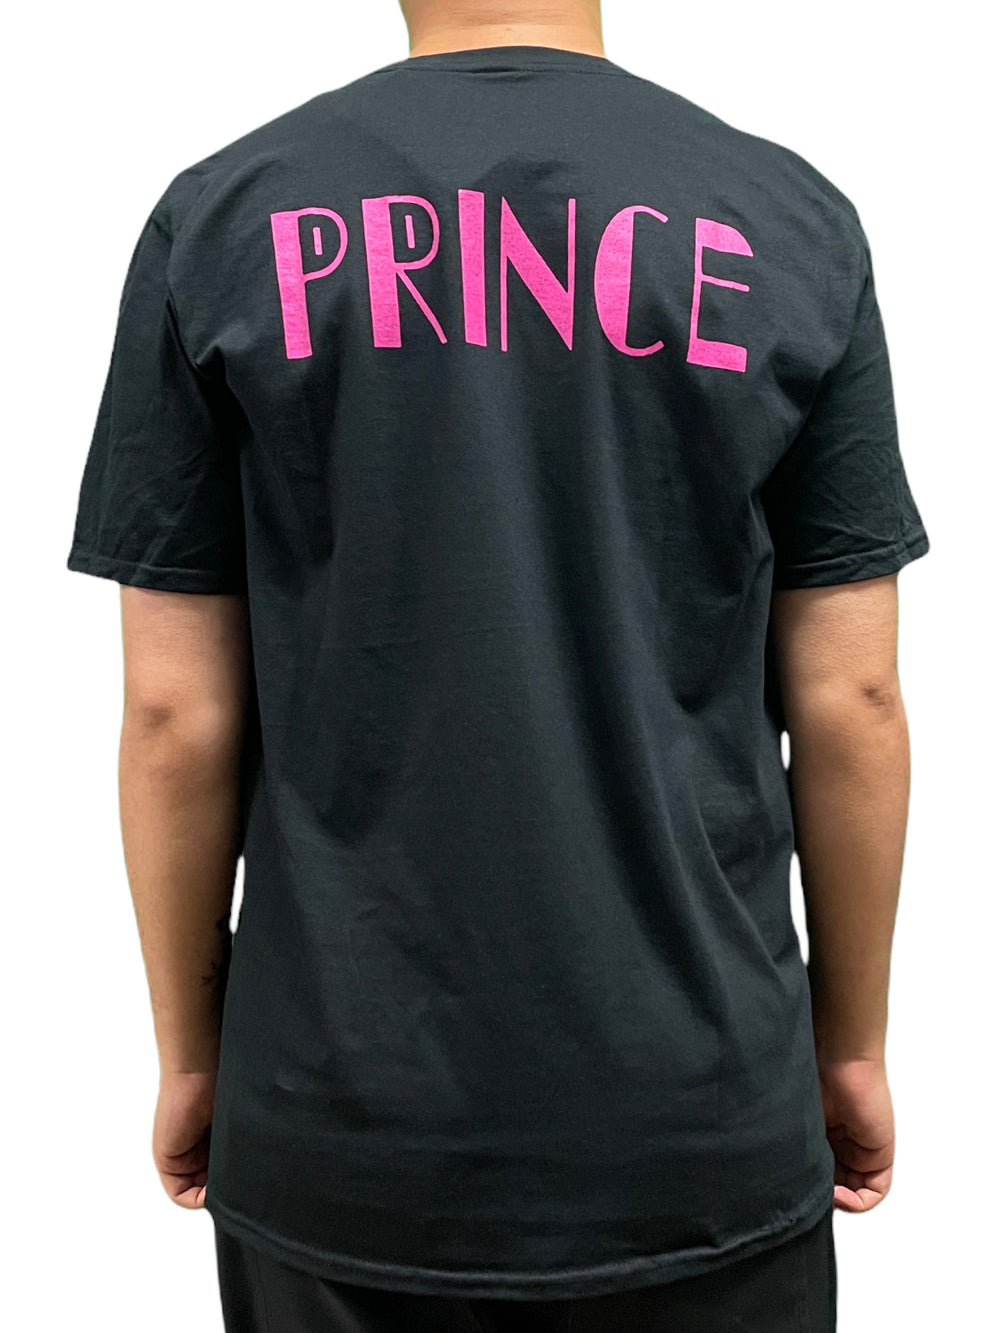 Prince – Controversy Many Faces Black Official Unisex T-Shirt Various Sizes Printed Front & Back NEW